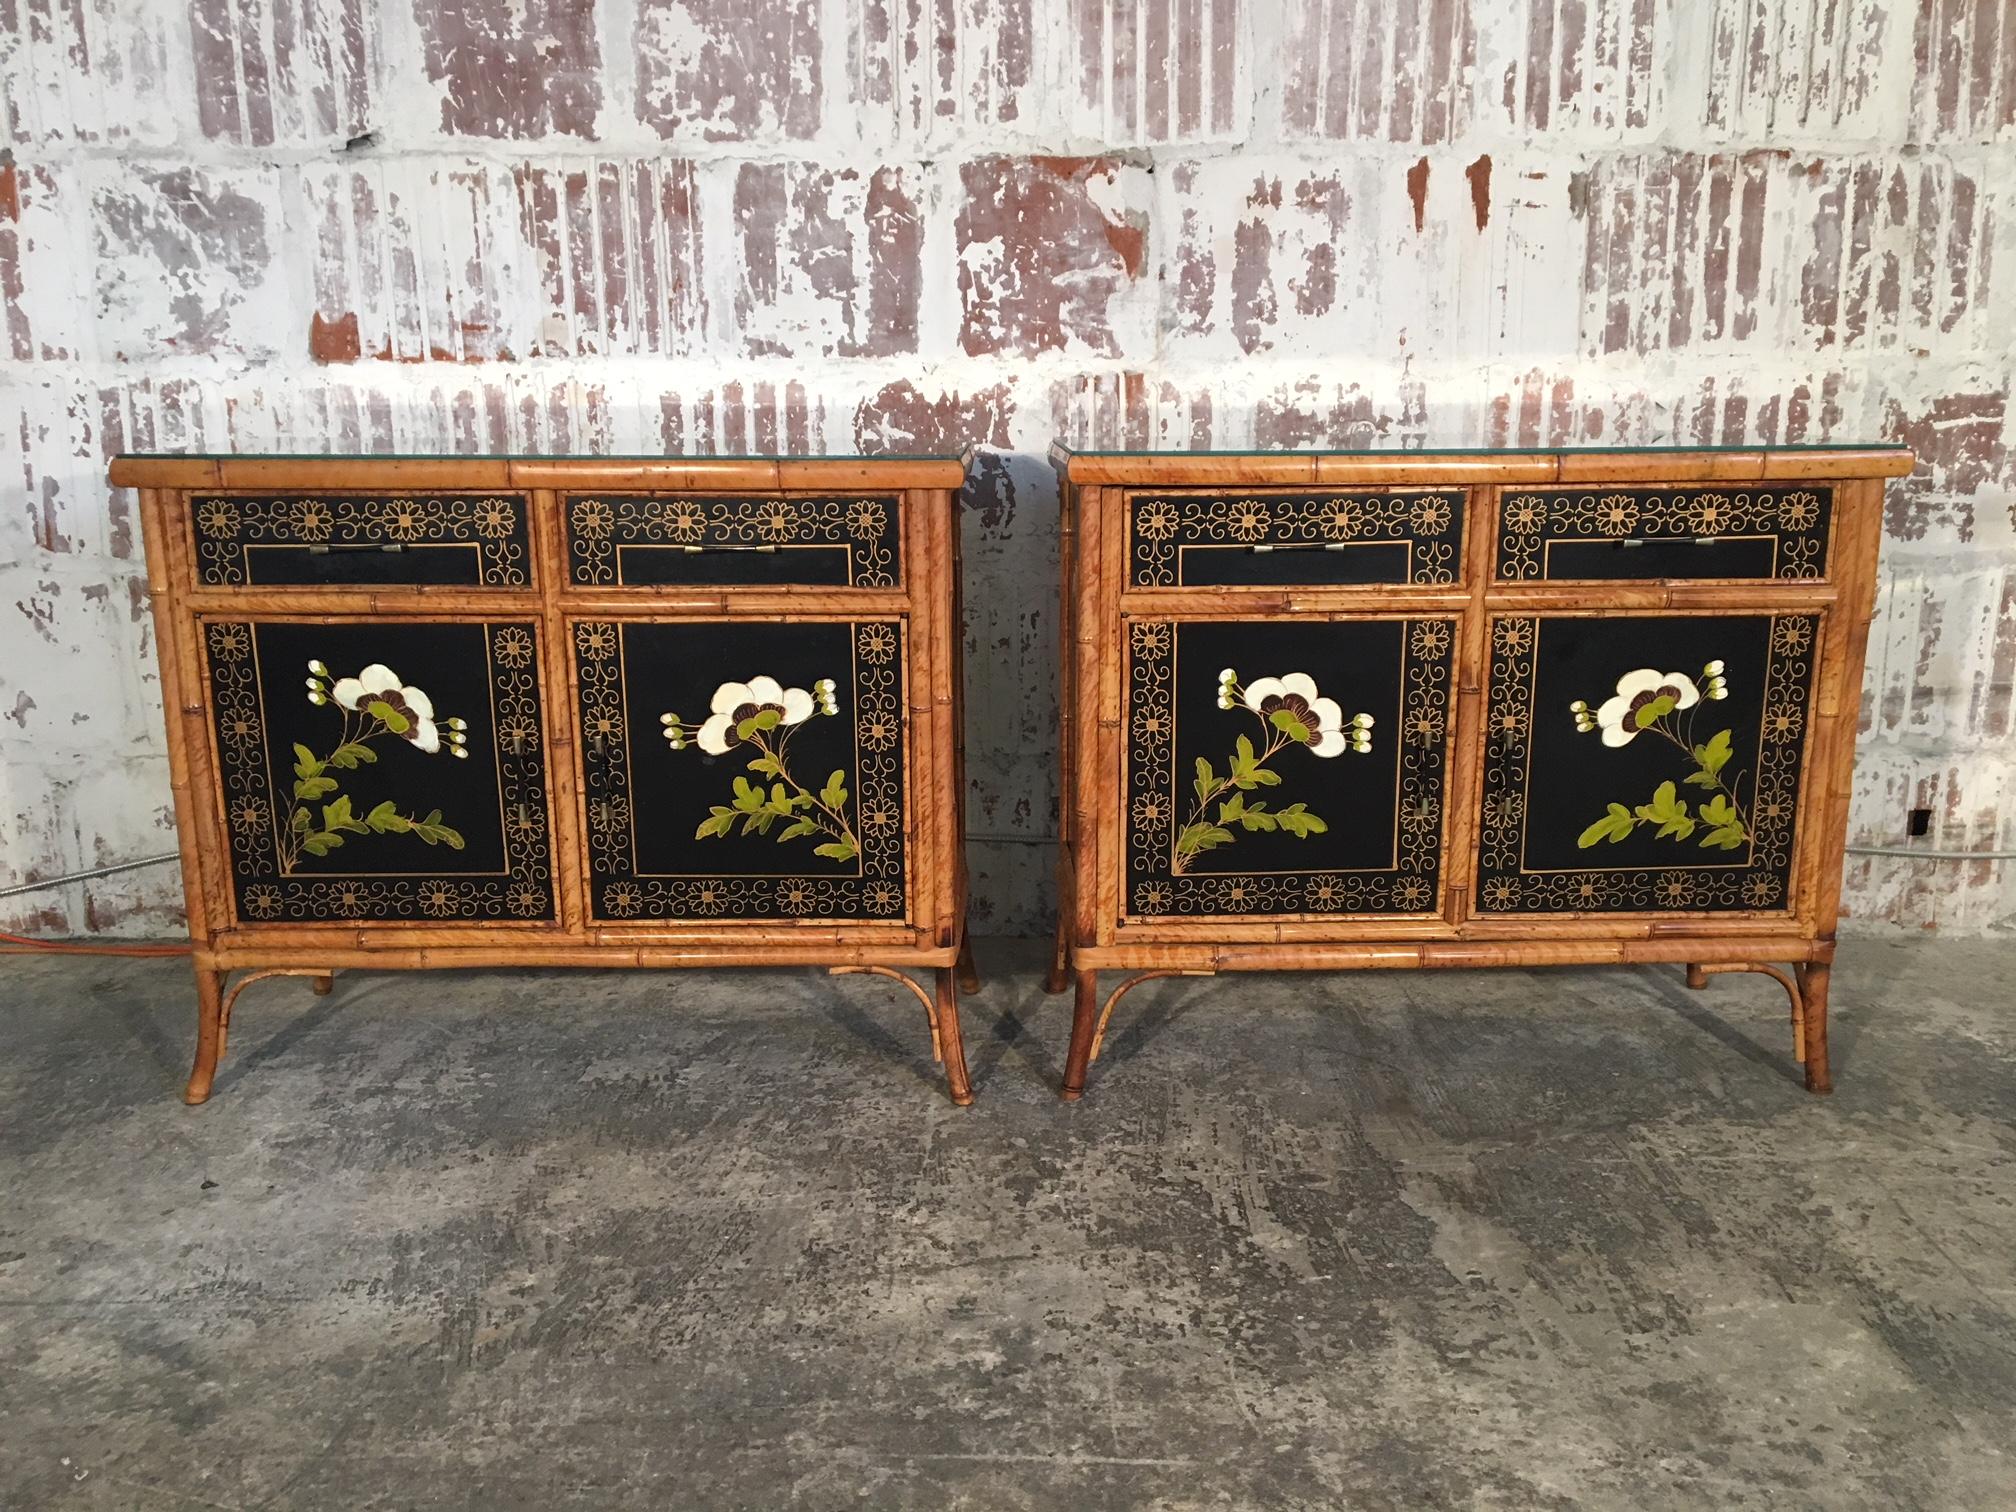 Twin Asian Chinoiserie cabinets feature hand-painted floral scenes and bamboo detailing. Dovetail joints, glass tops and brass hardware. Excellent vintage condition with minor signs of age appropriate wear. One small chip on back corner of one glass